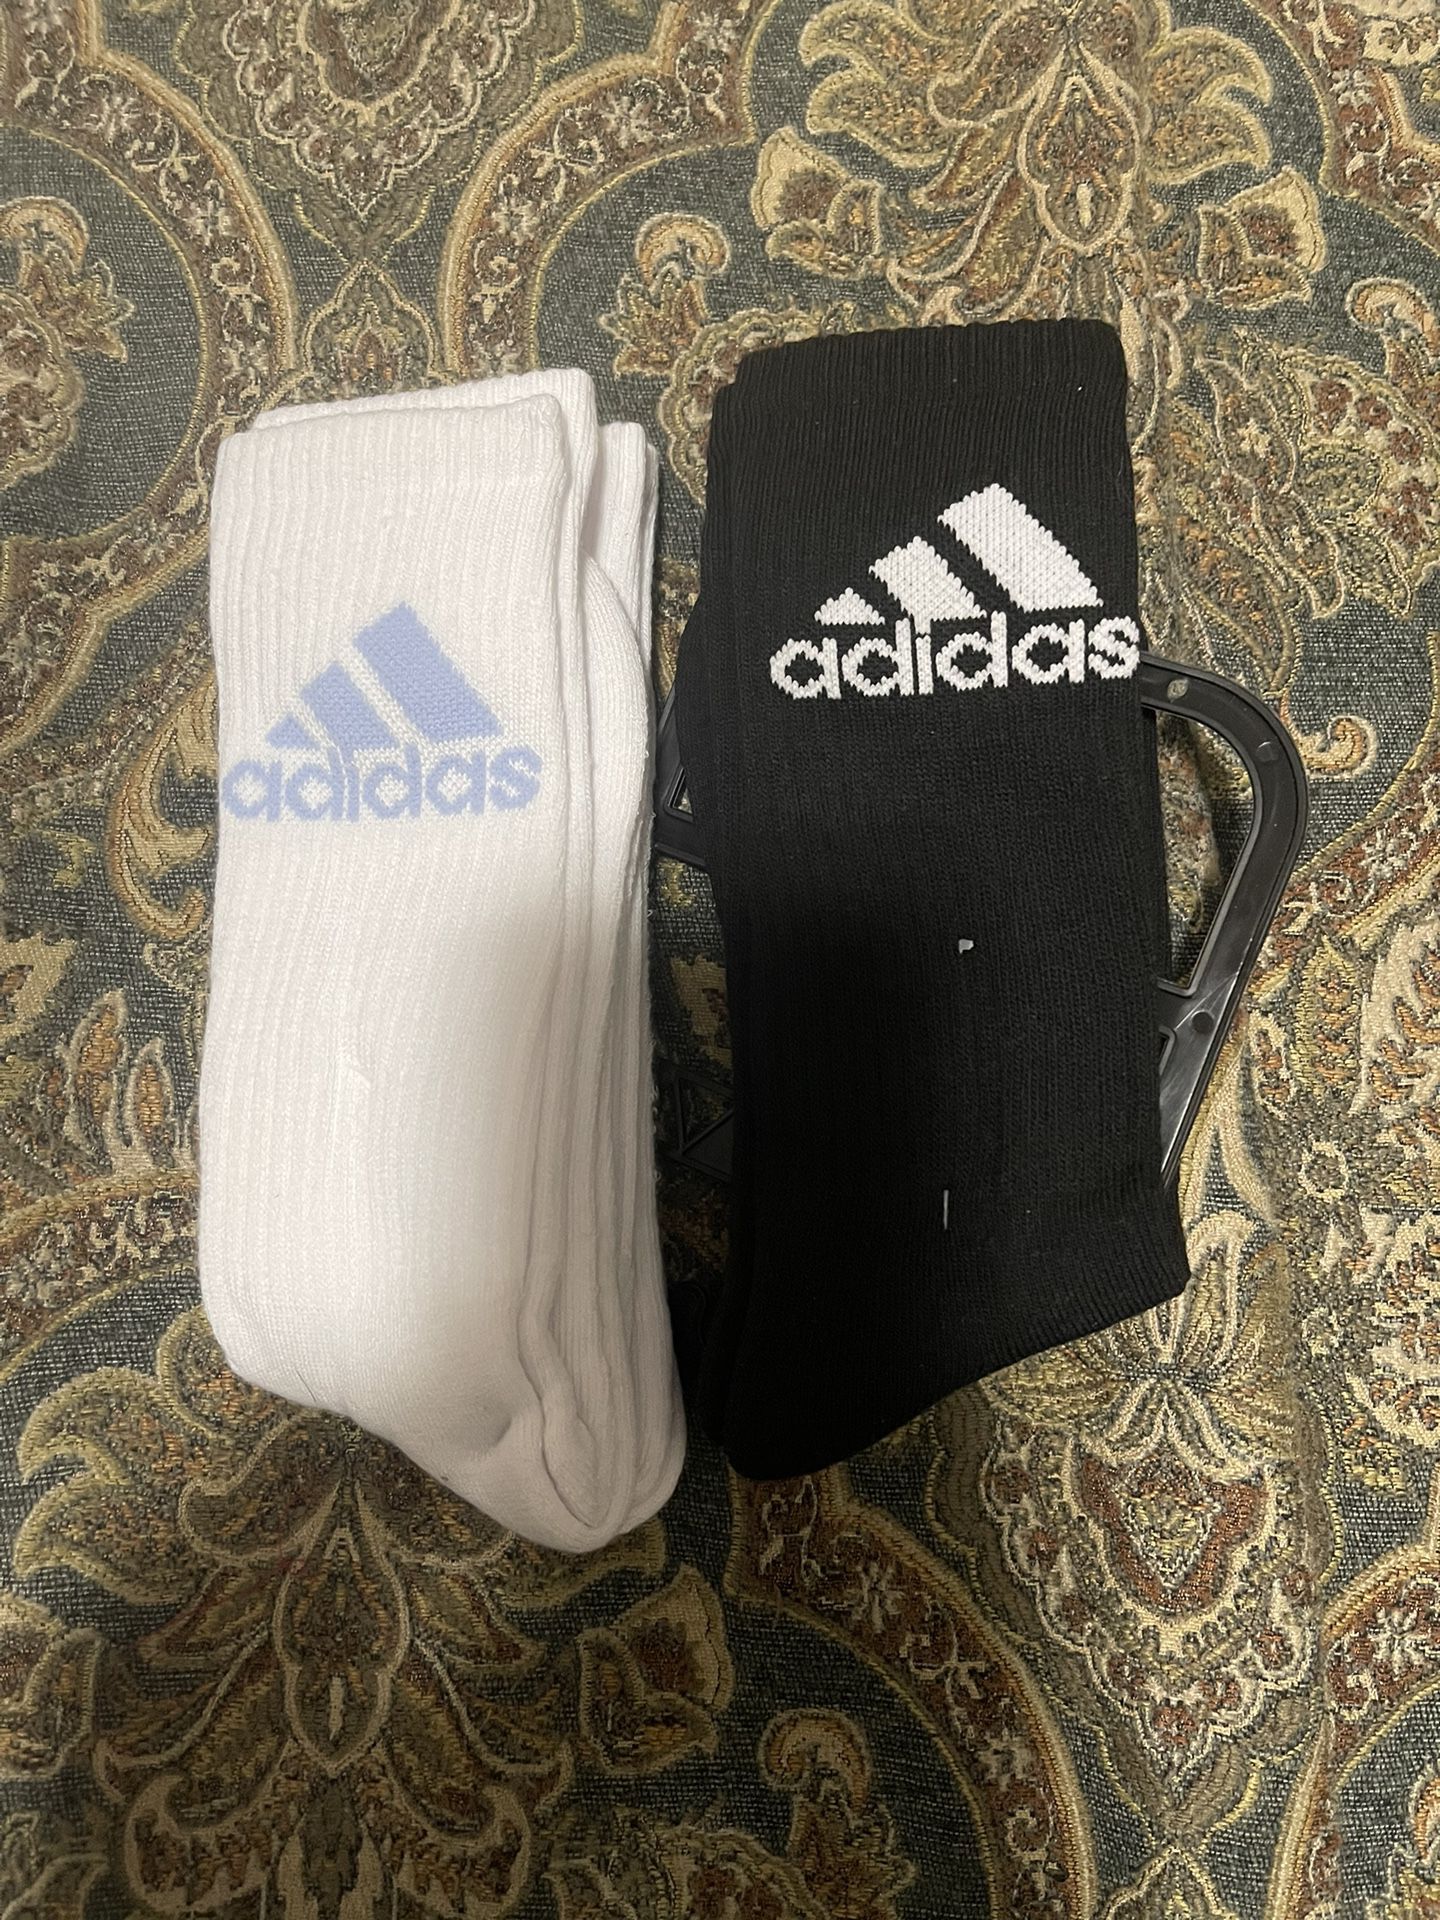 New 4 Pairs Of Adidas Socks Fits Size M 8-12